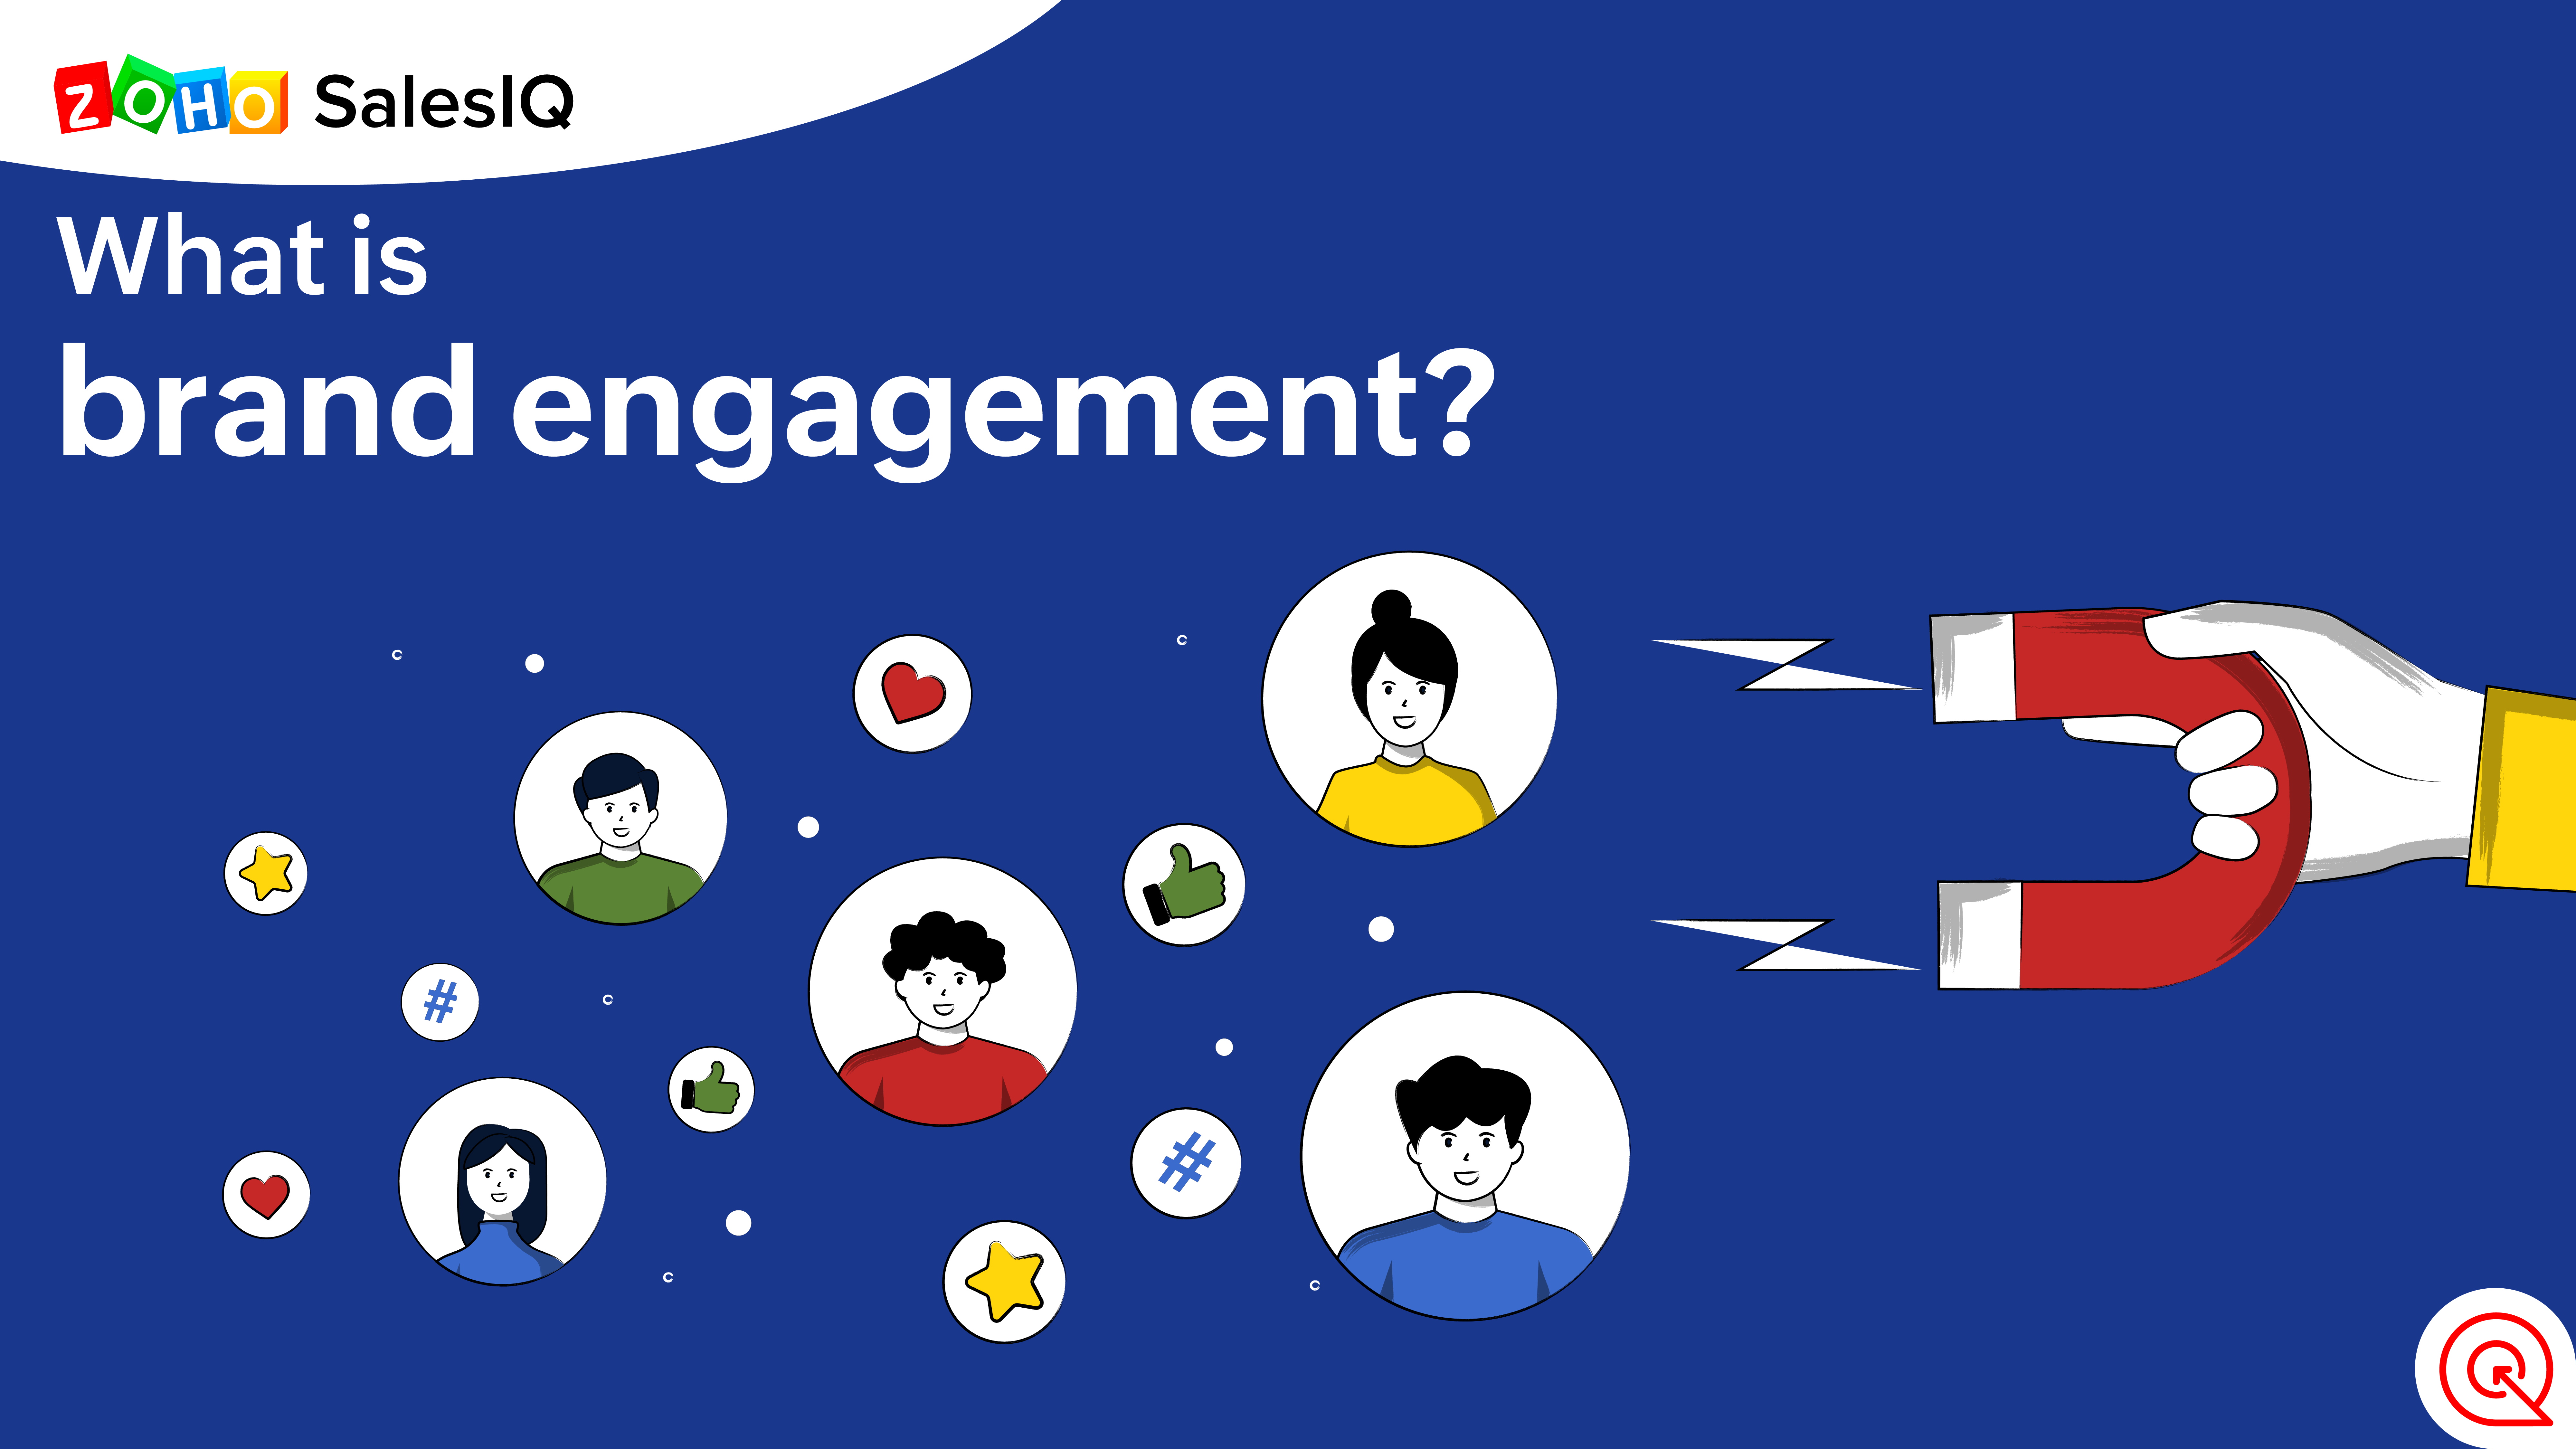 What is brand engagement?